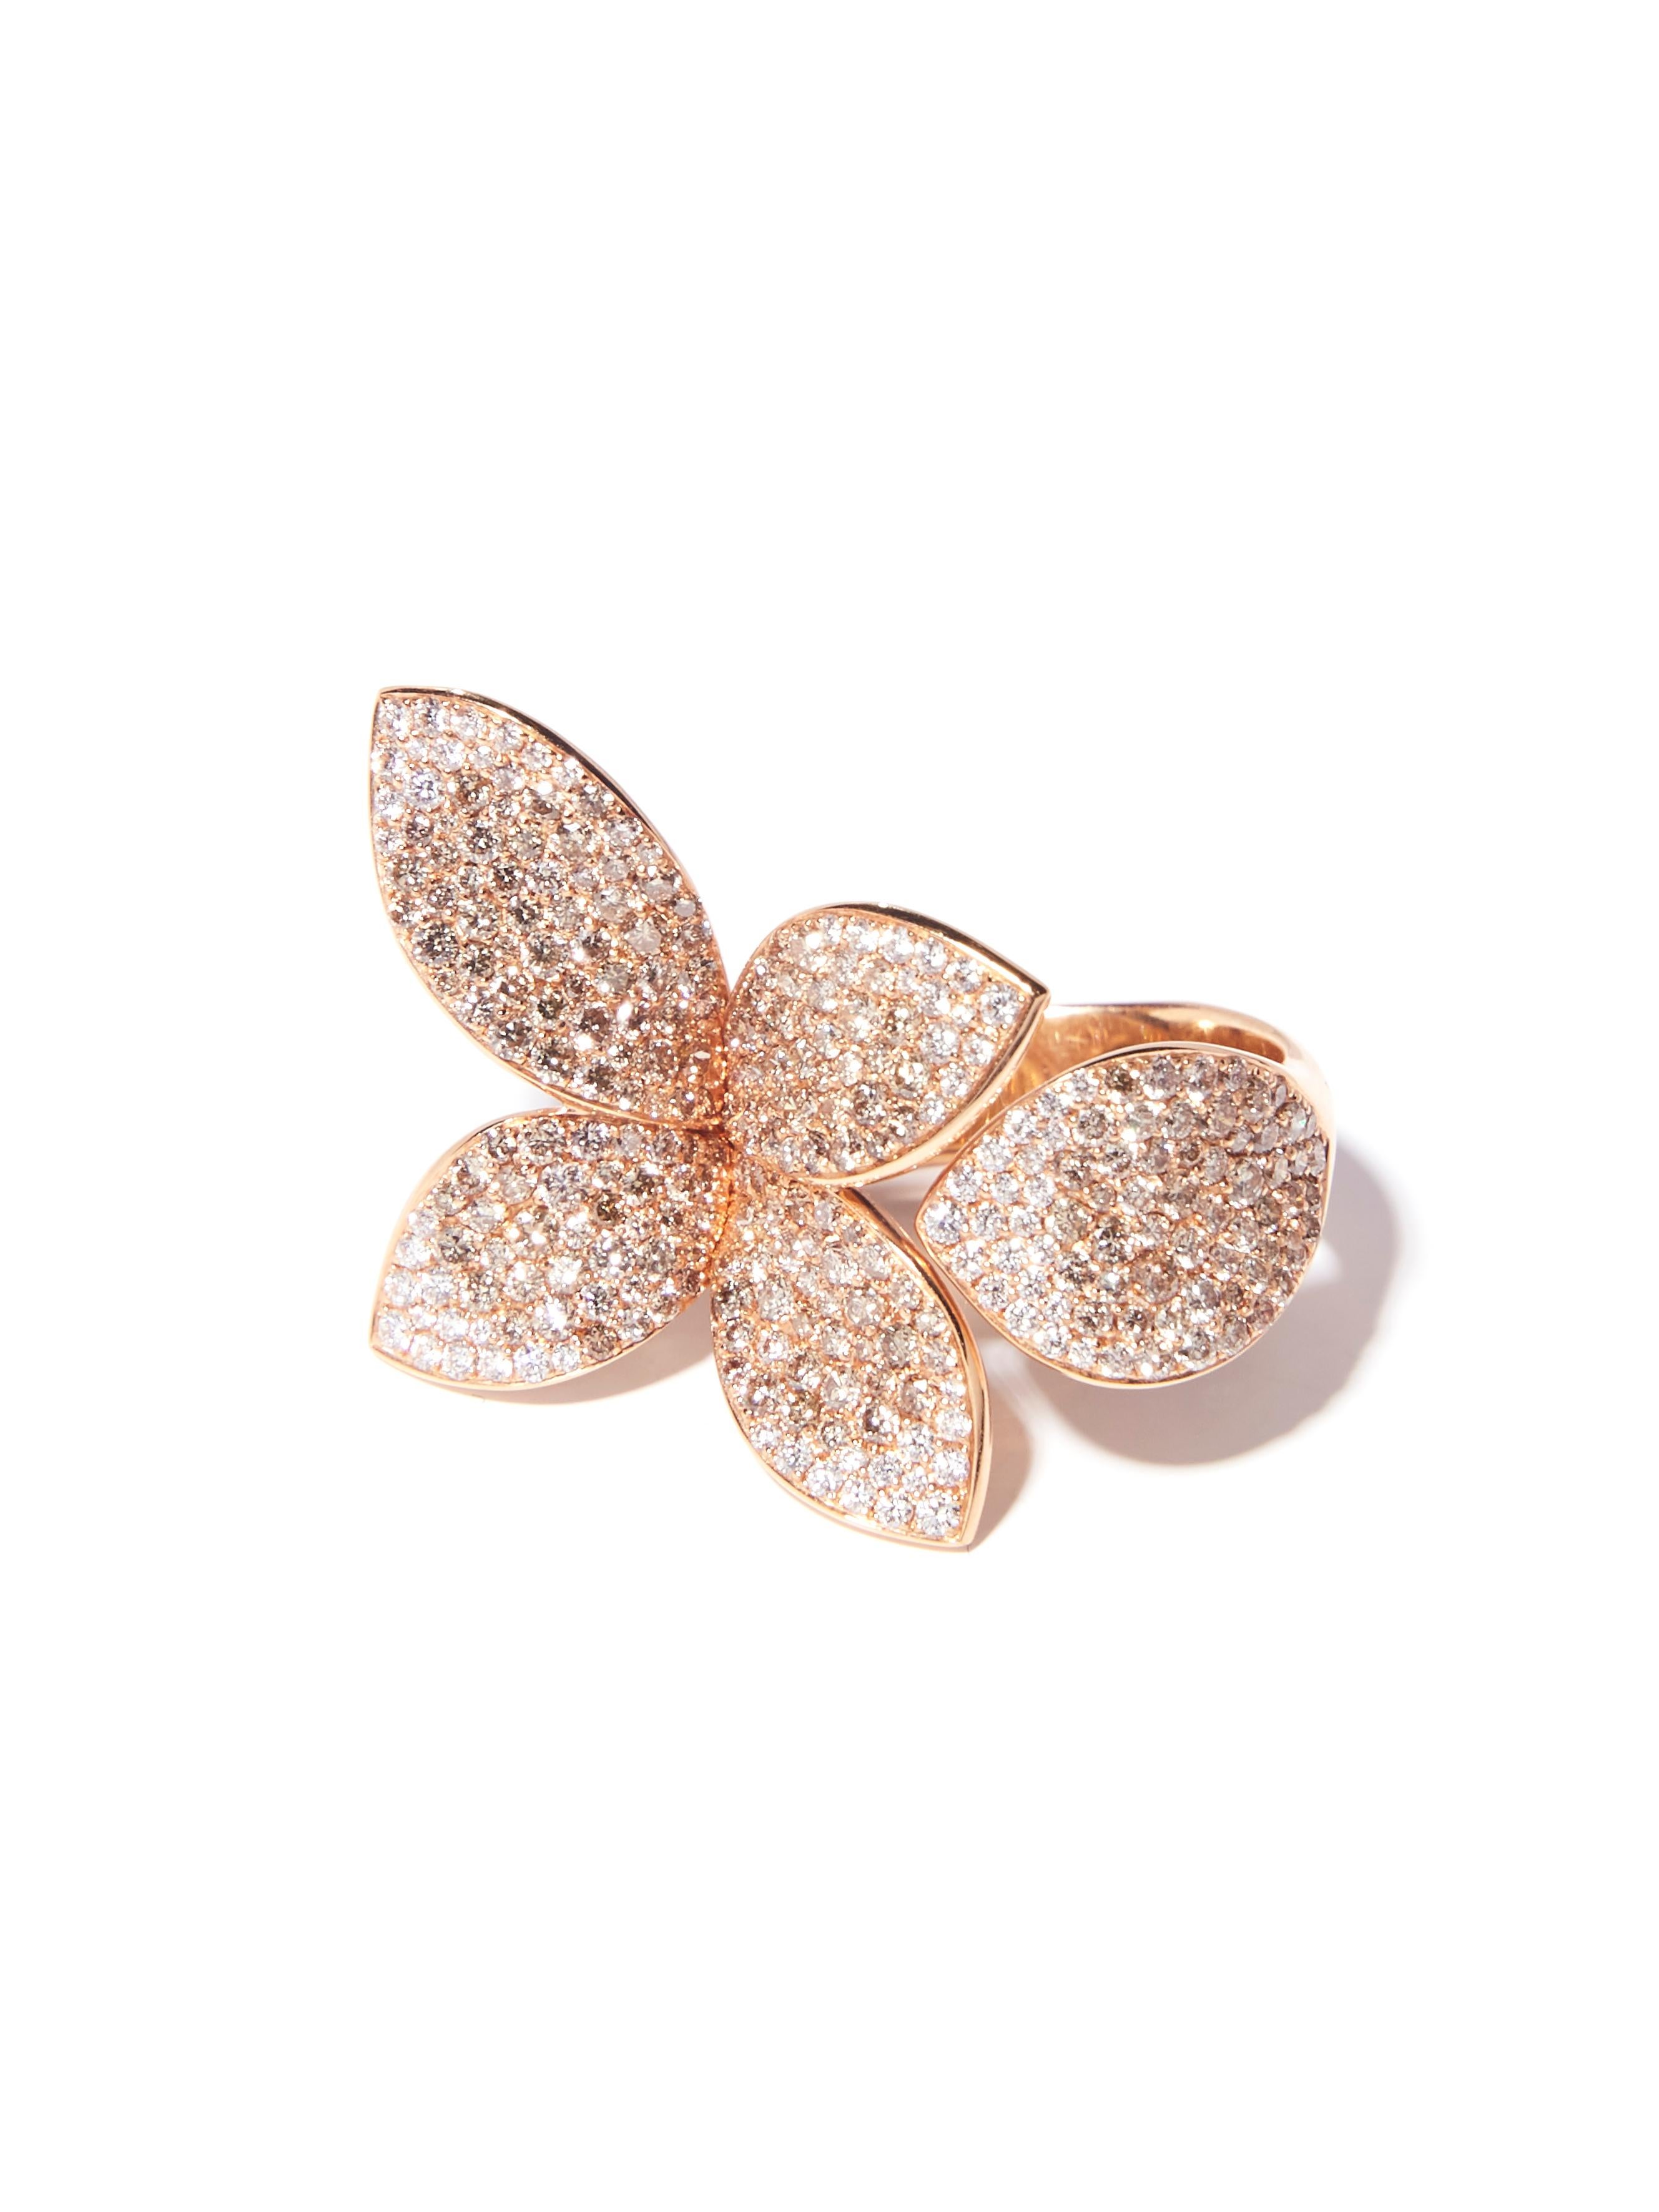 Pasquale Bruni ring in 18 karat rose gold set with champagne and white diamonds with a total carat weight of 3.10 carat.

Leaves and petals are crafted in rose gold and sprinkled with pave set diamonds. The leaves are crafted precisely and fit